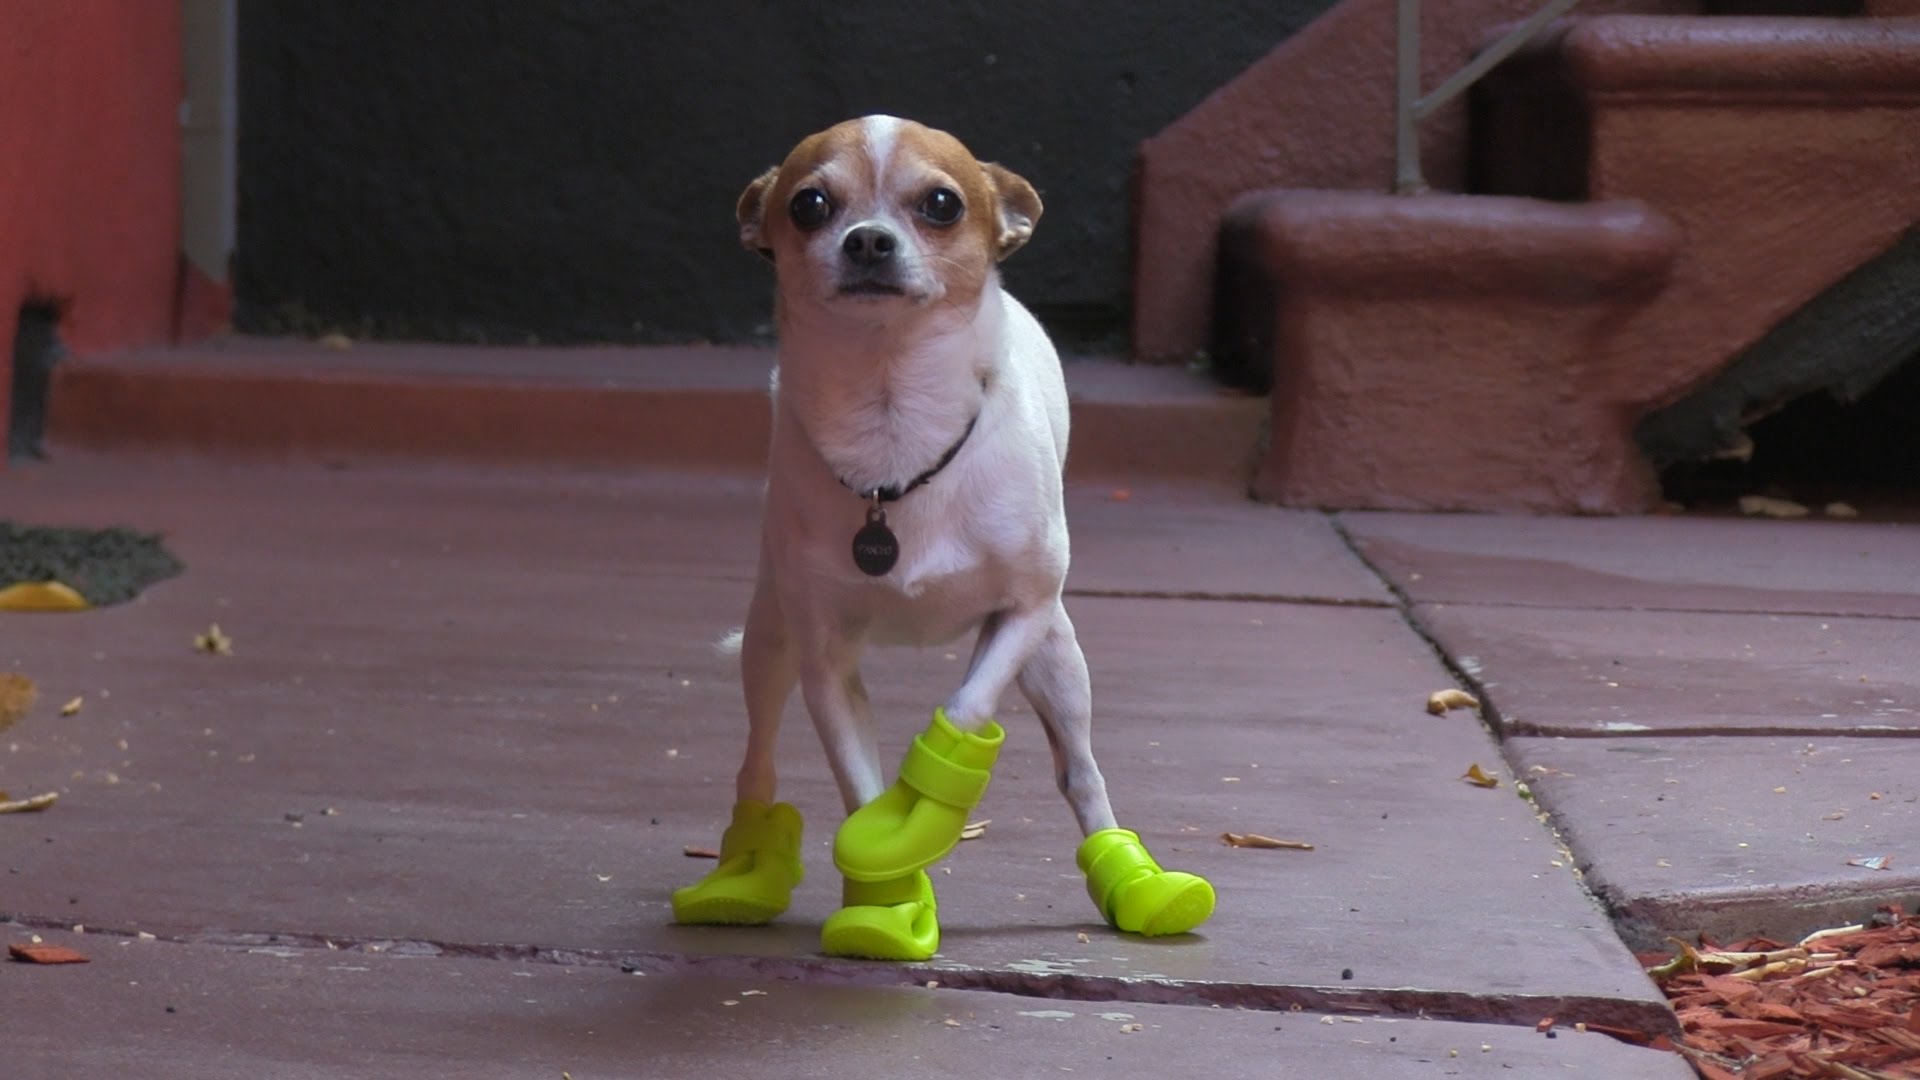 Chihuahua tries boots for the first time - YouTube